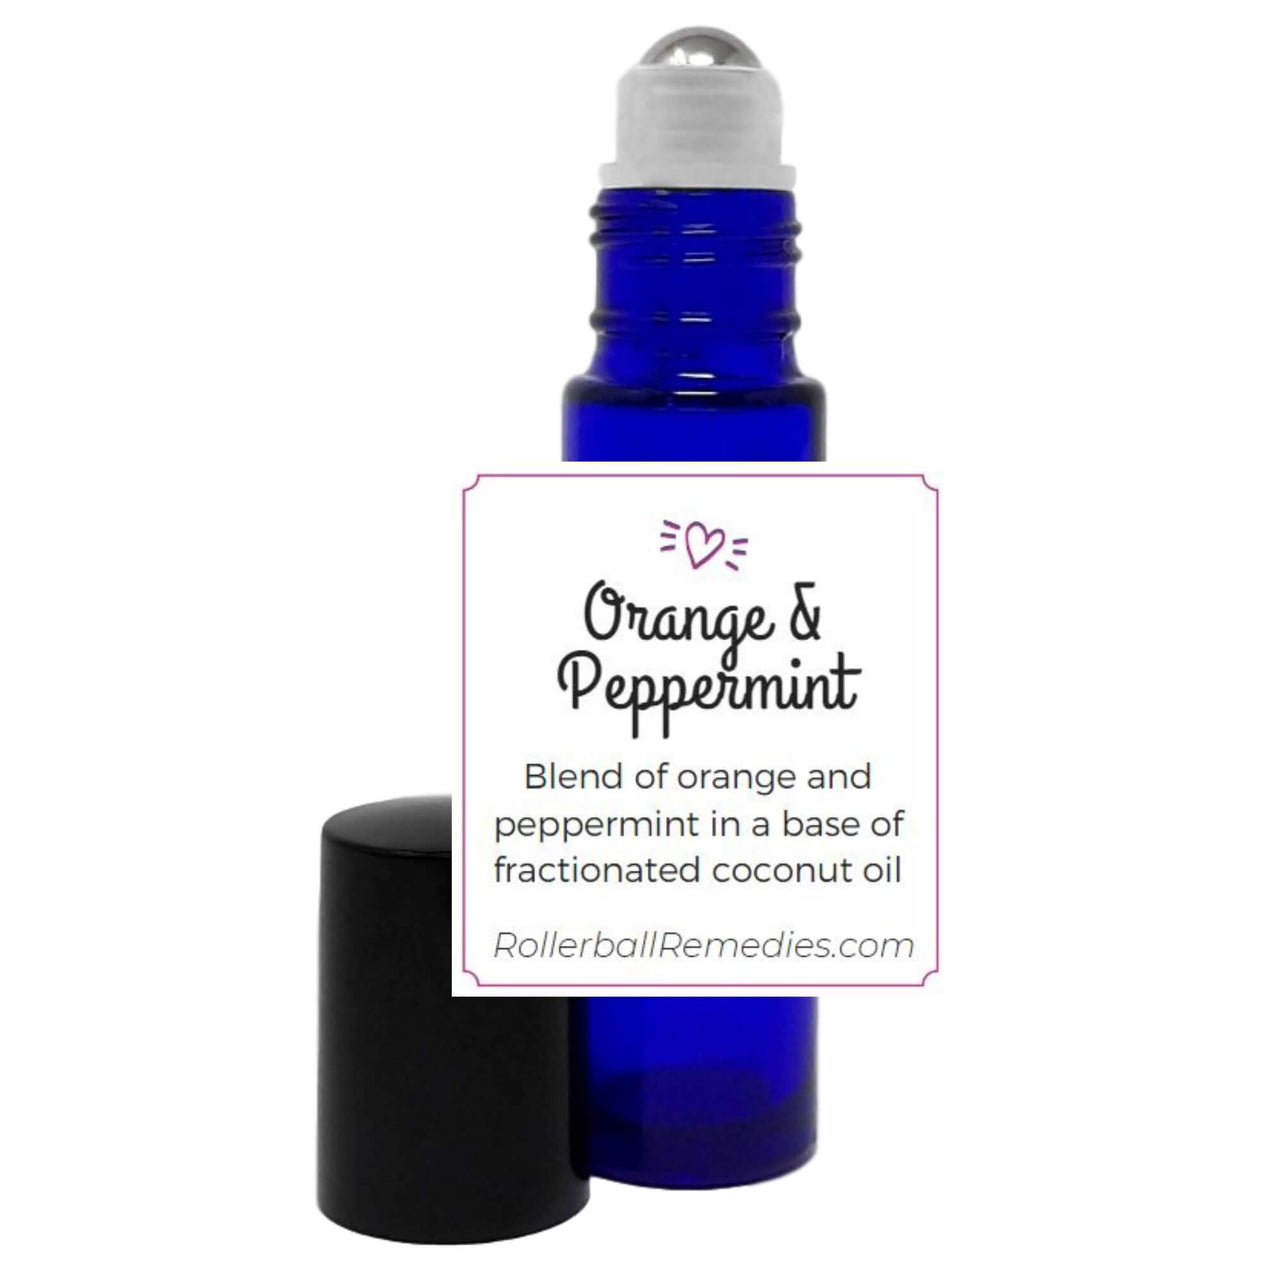 Orange and Peppermint Essential Oil Roller Blend Review Why Consider This Product